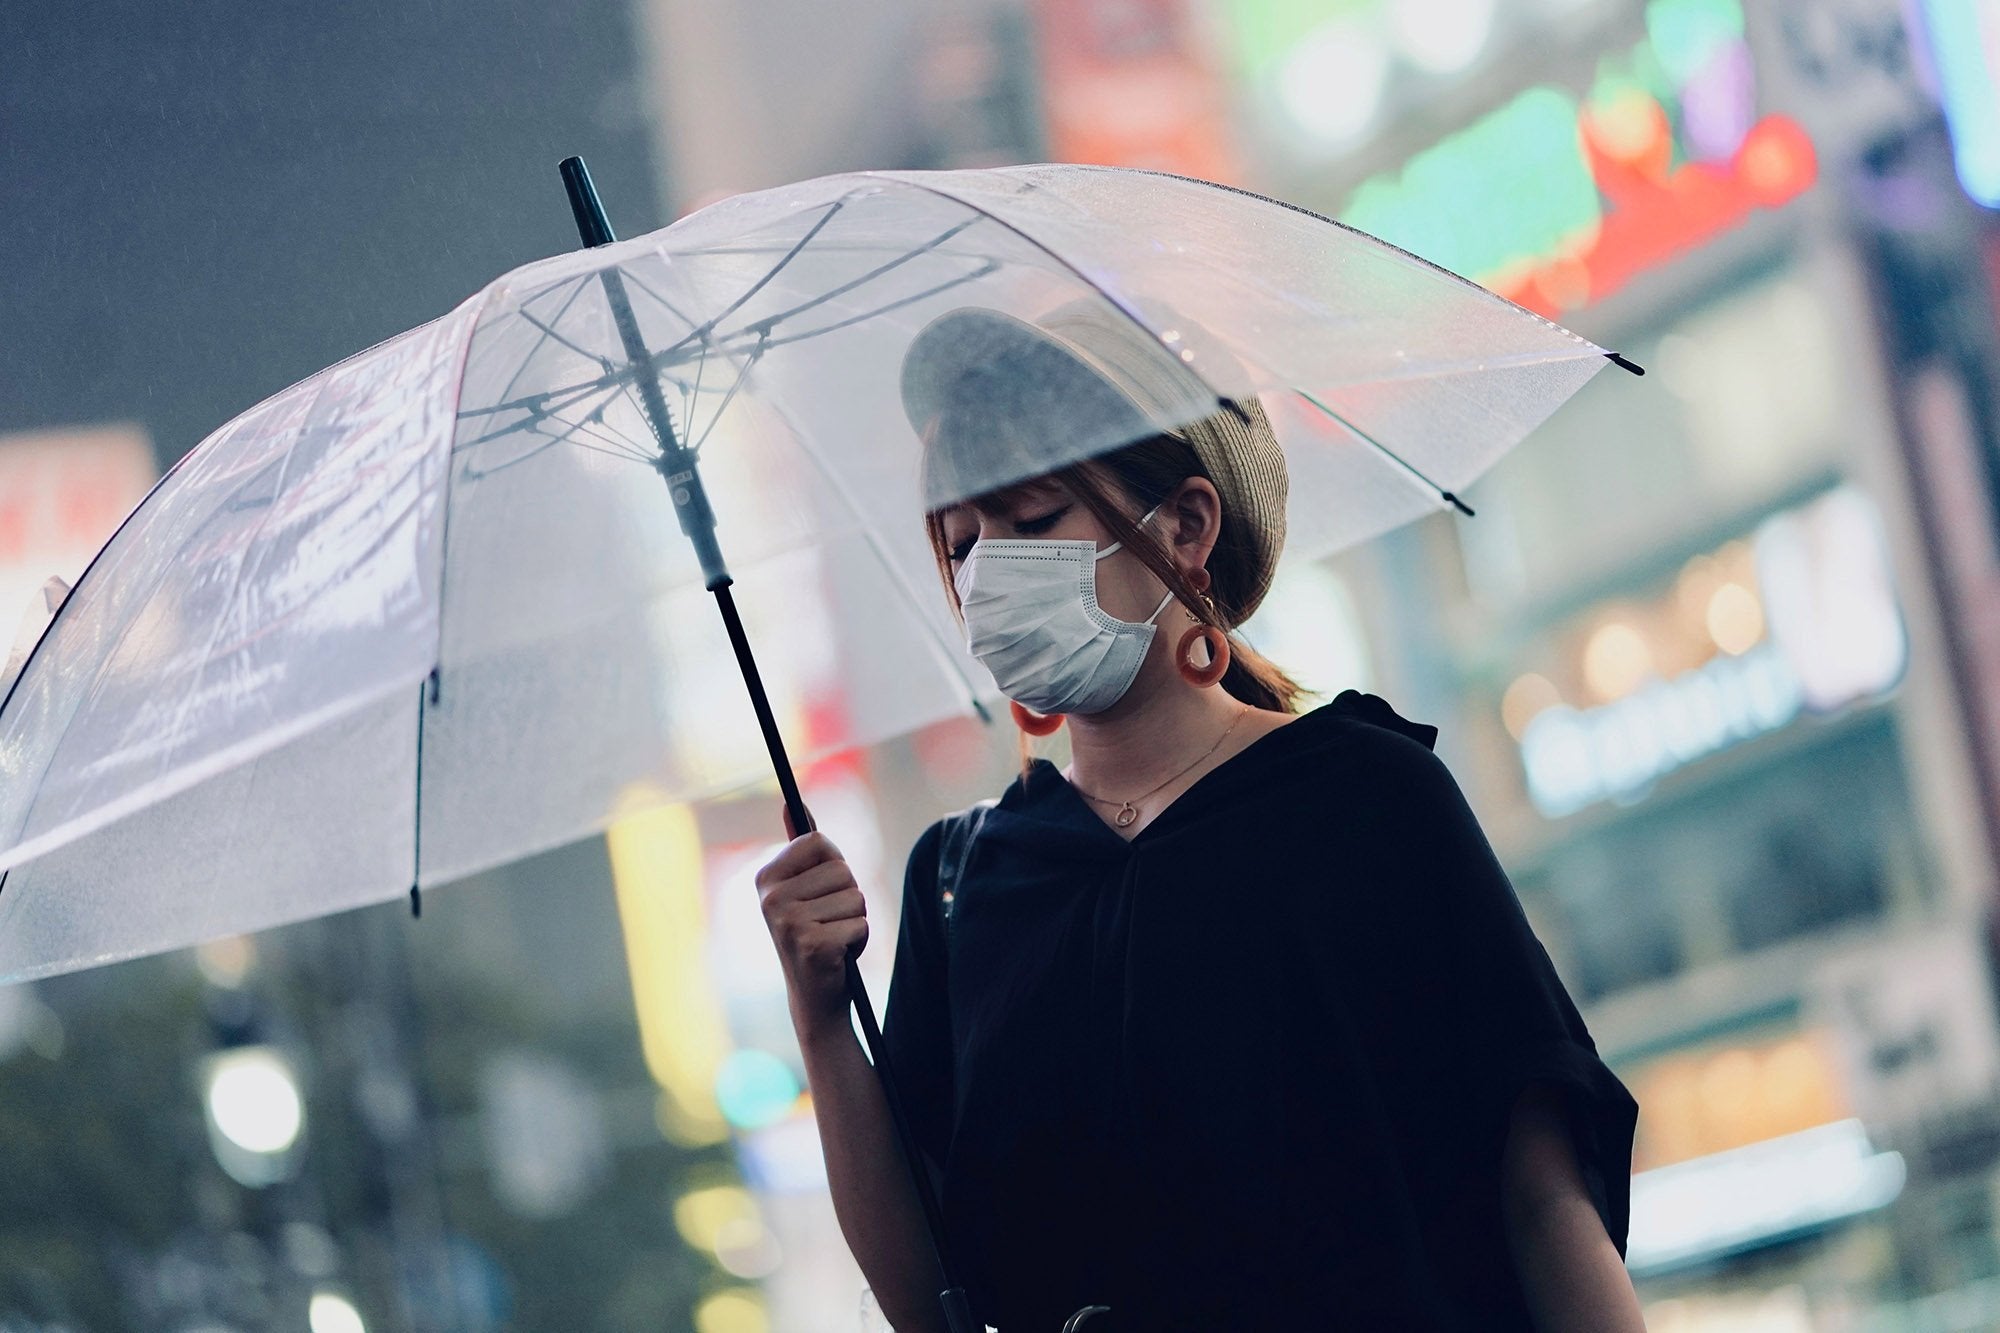 How to Protect Yourself During the Coronavirus Outbreak